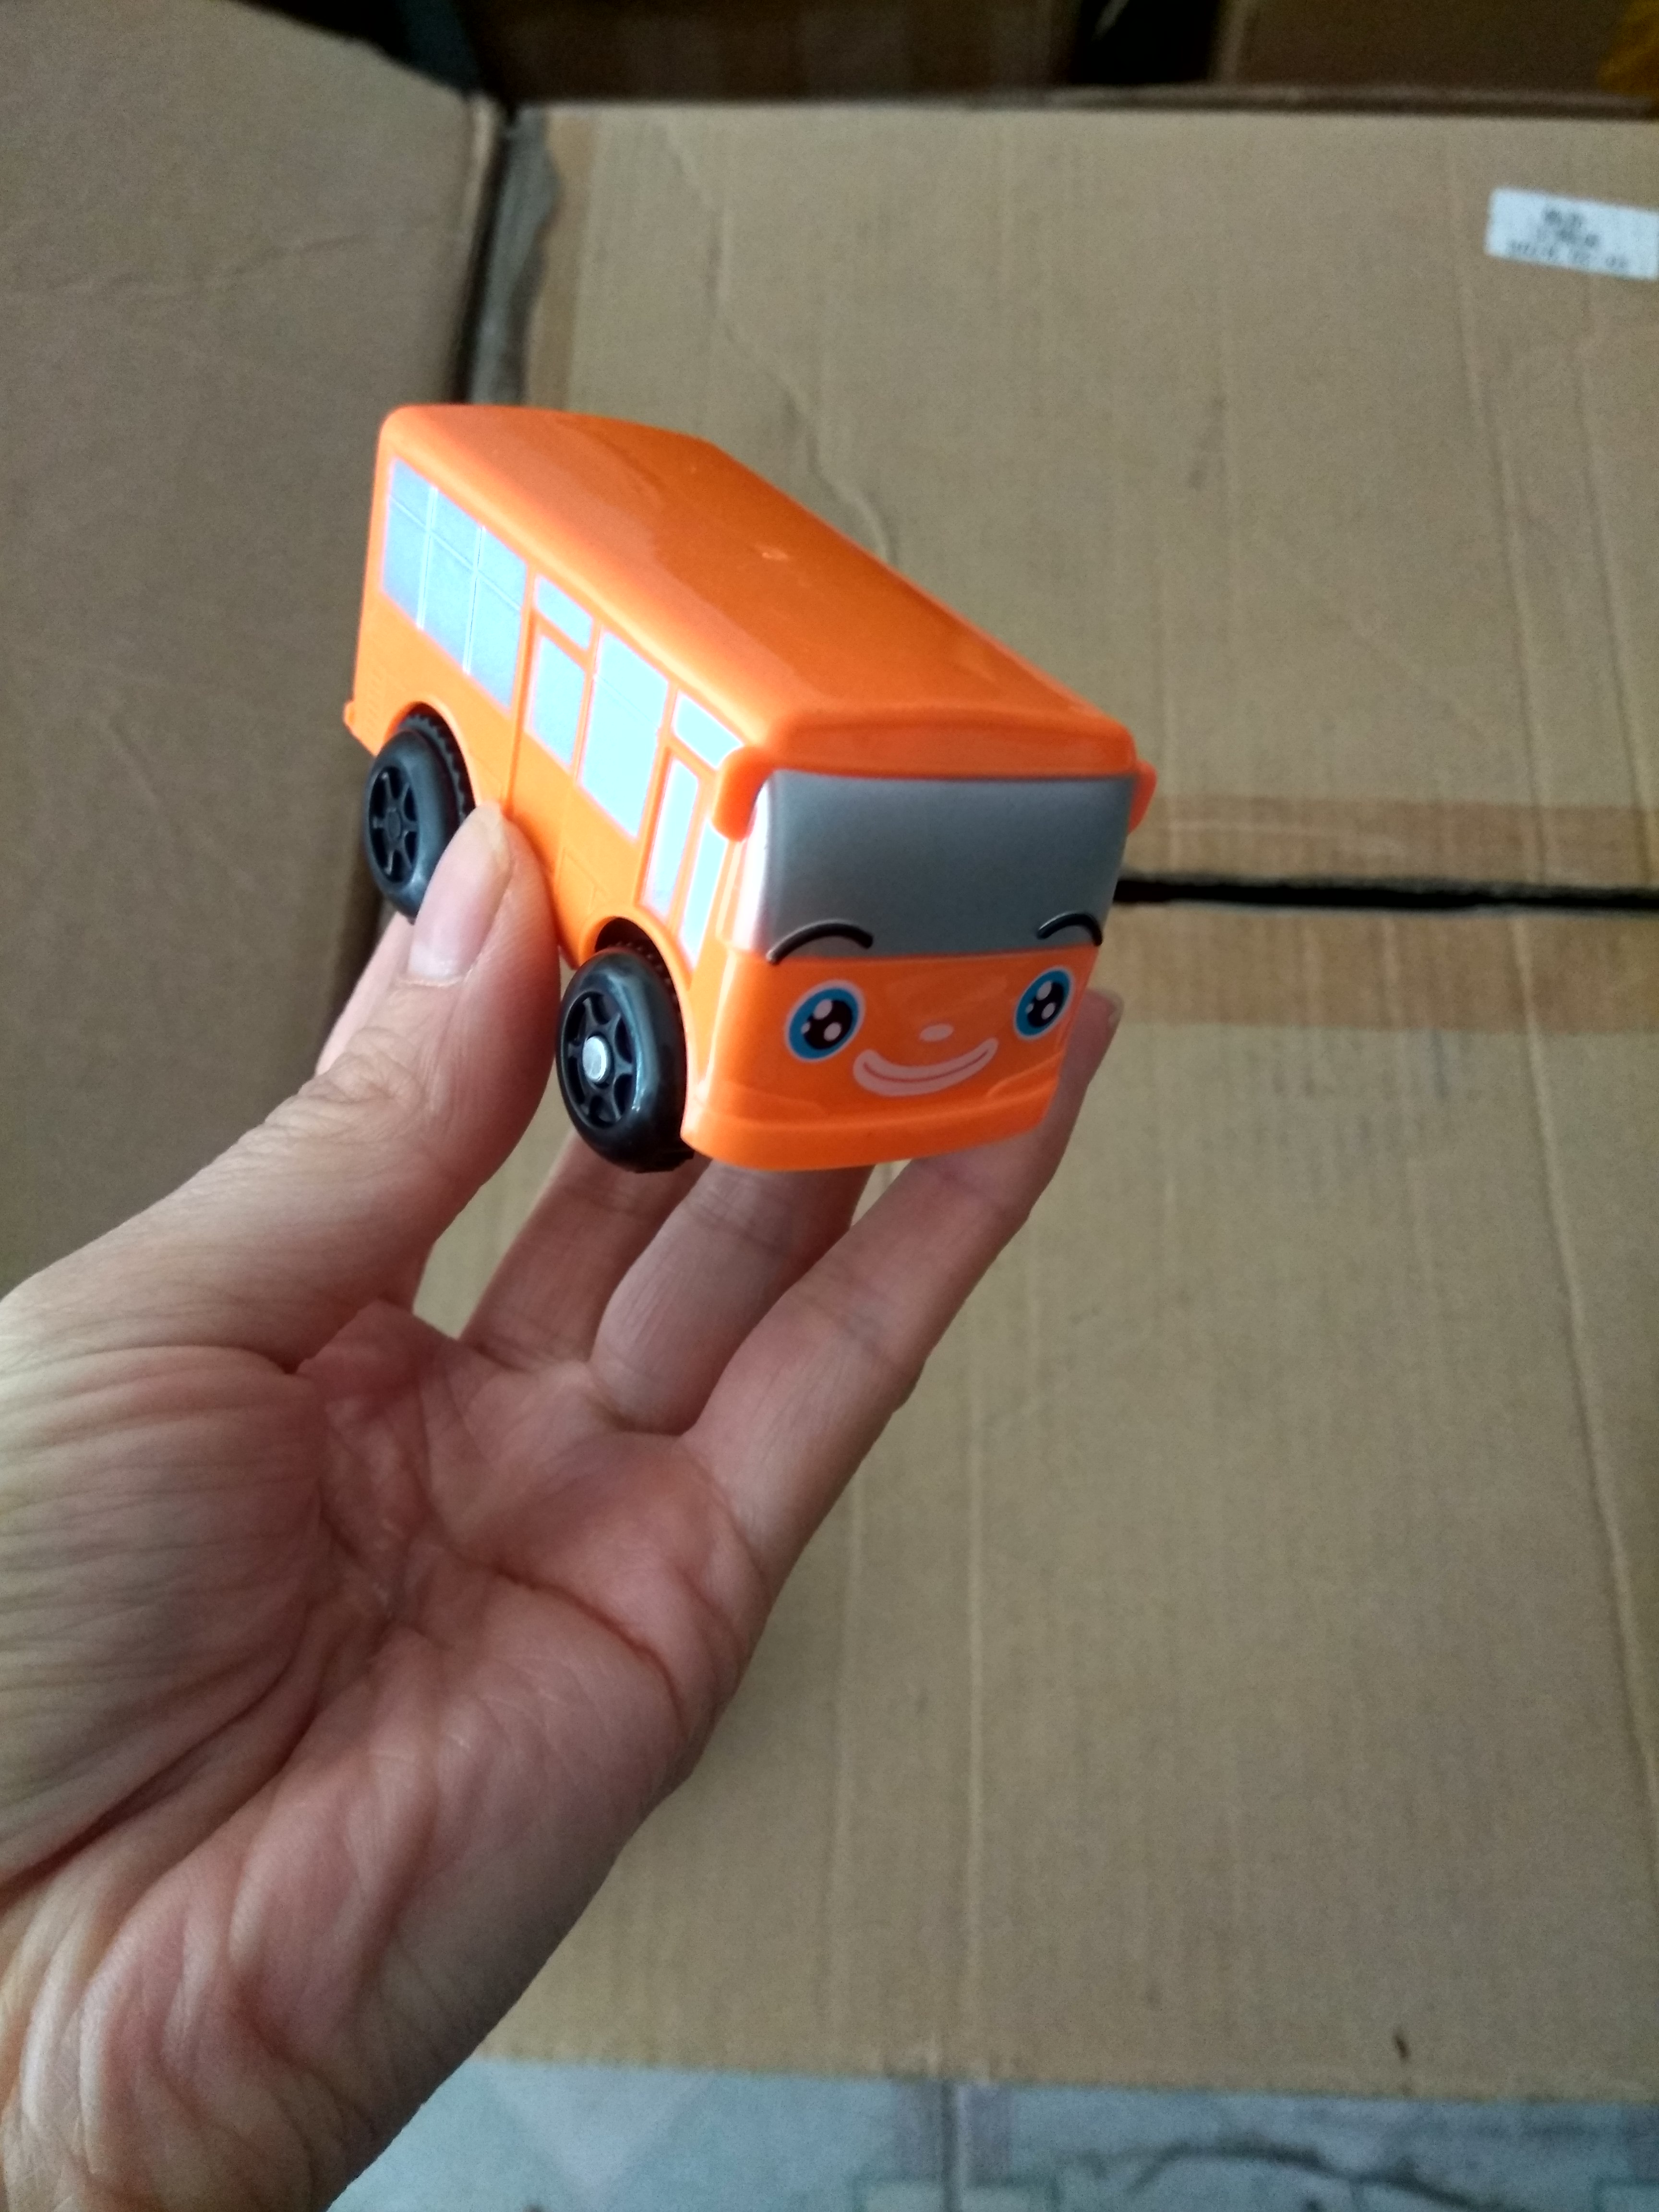 Smiling Face Orange Bus Electric Racing Car 4.2CmElectric track Toy car Specially equipped racing multi-storey track automobile Changeable Rail car Toys a car Electric